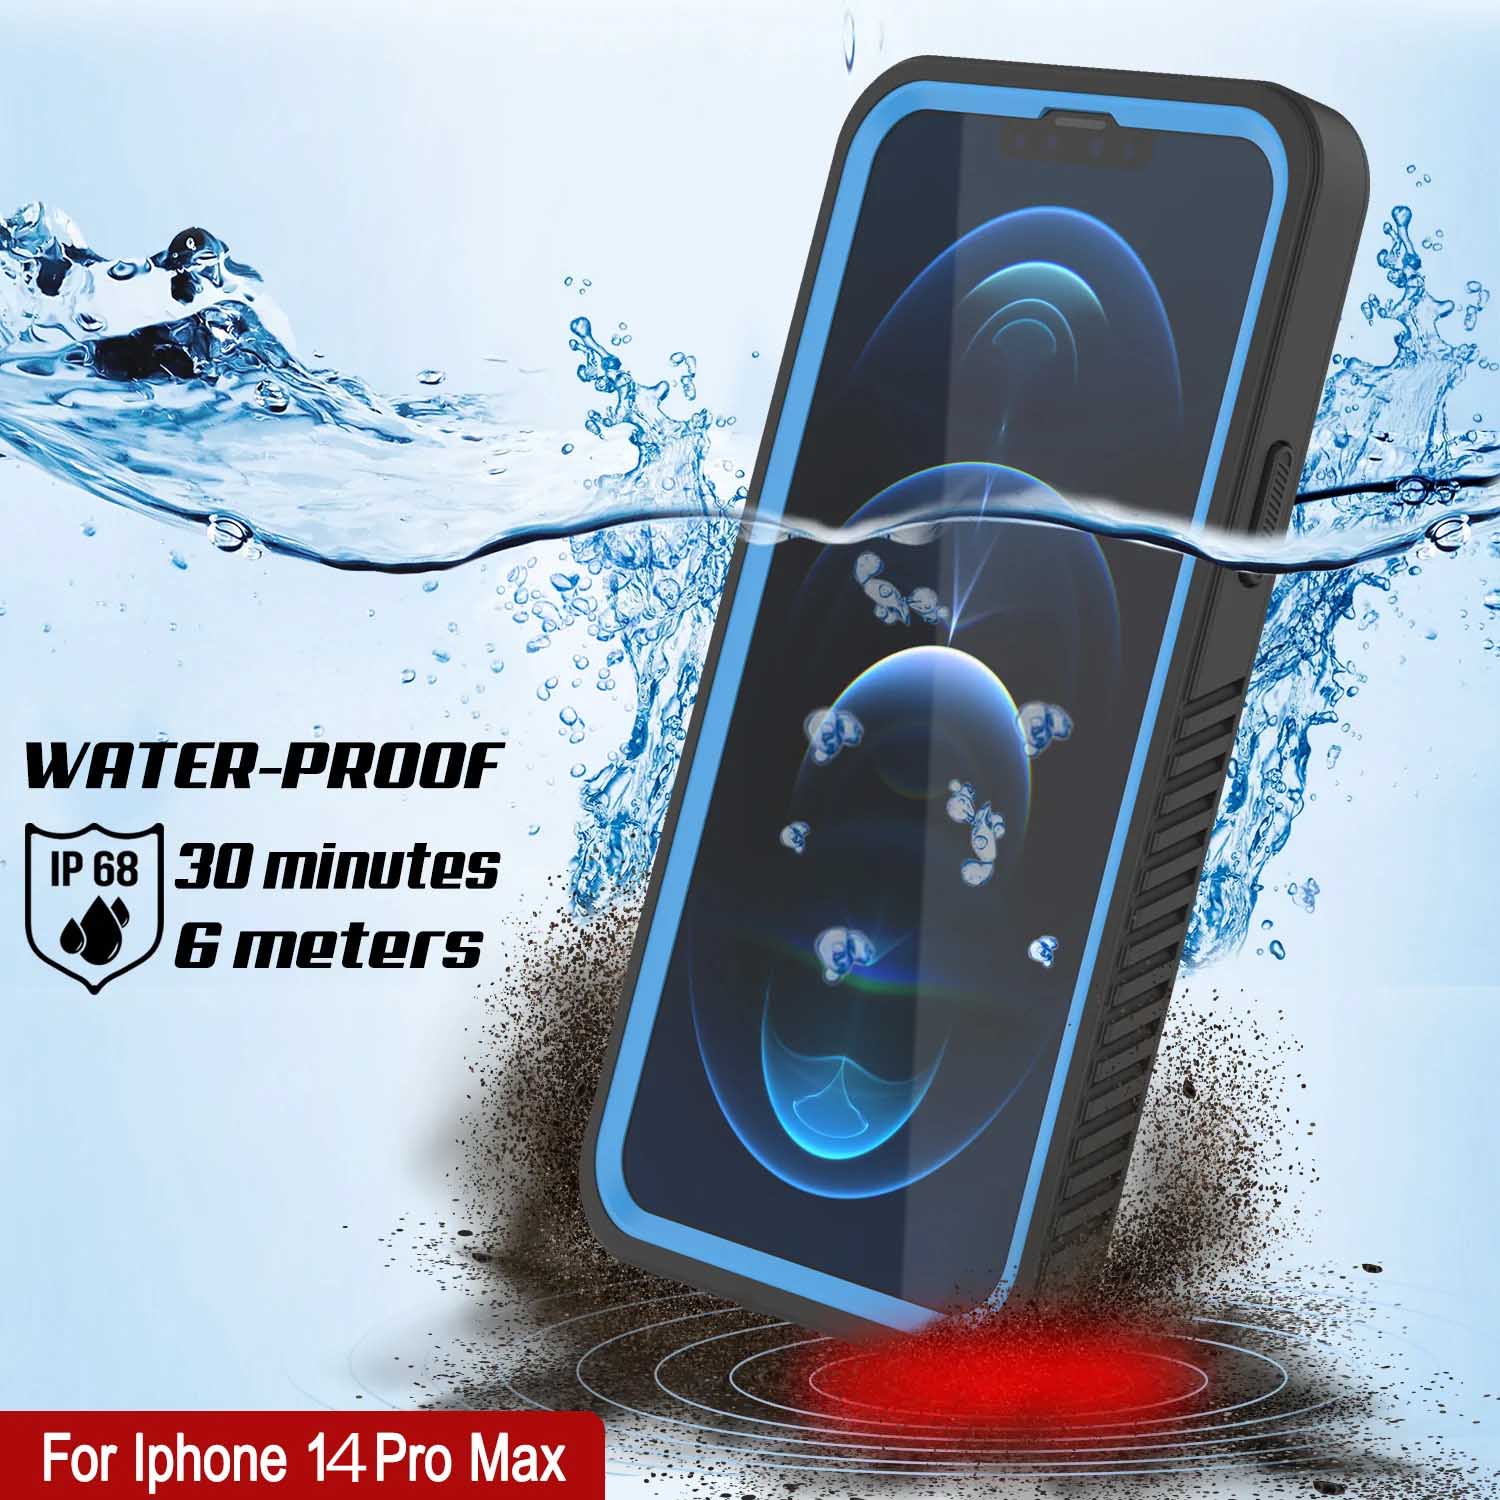 Products iPhone 14 Pro Max Waterproof Case, Punkcase [Extreme Series] Armor Cover W/ Built In Screen Protector [Light Blue]